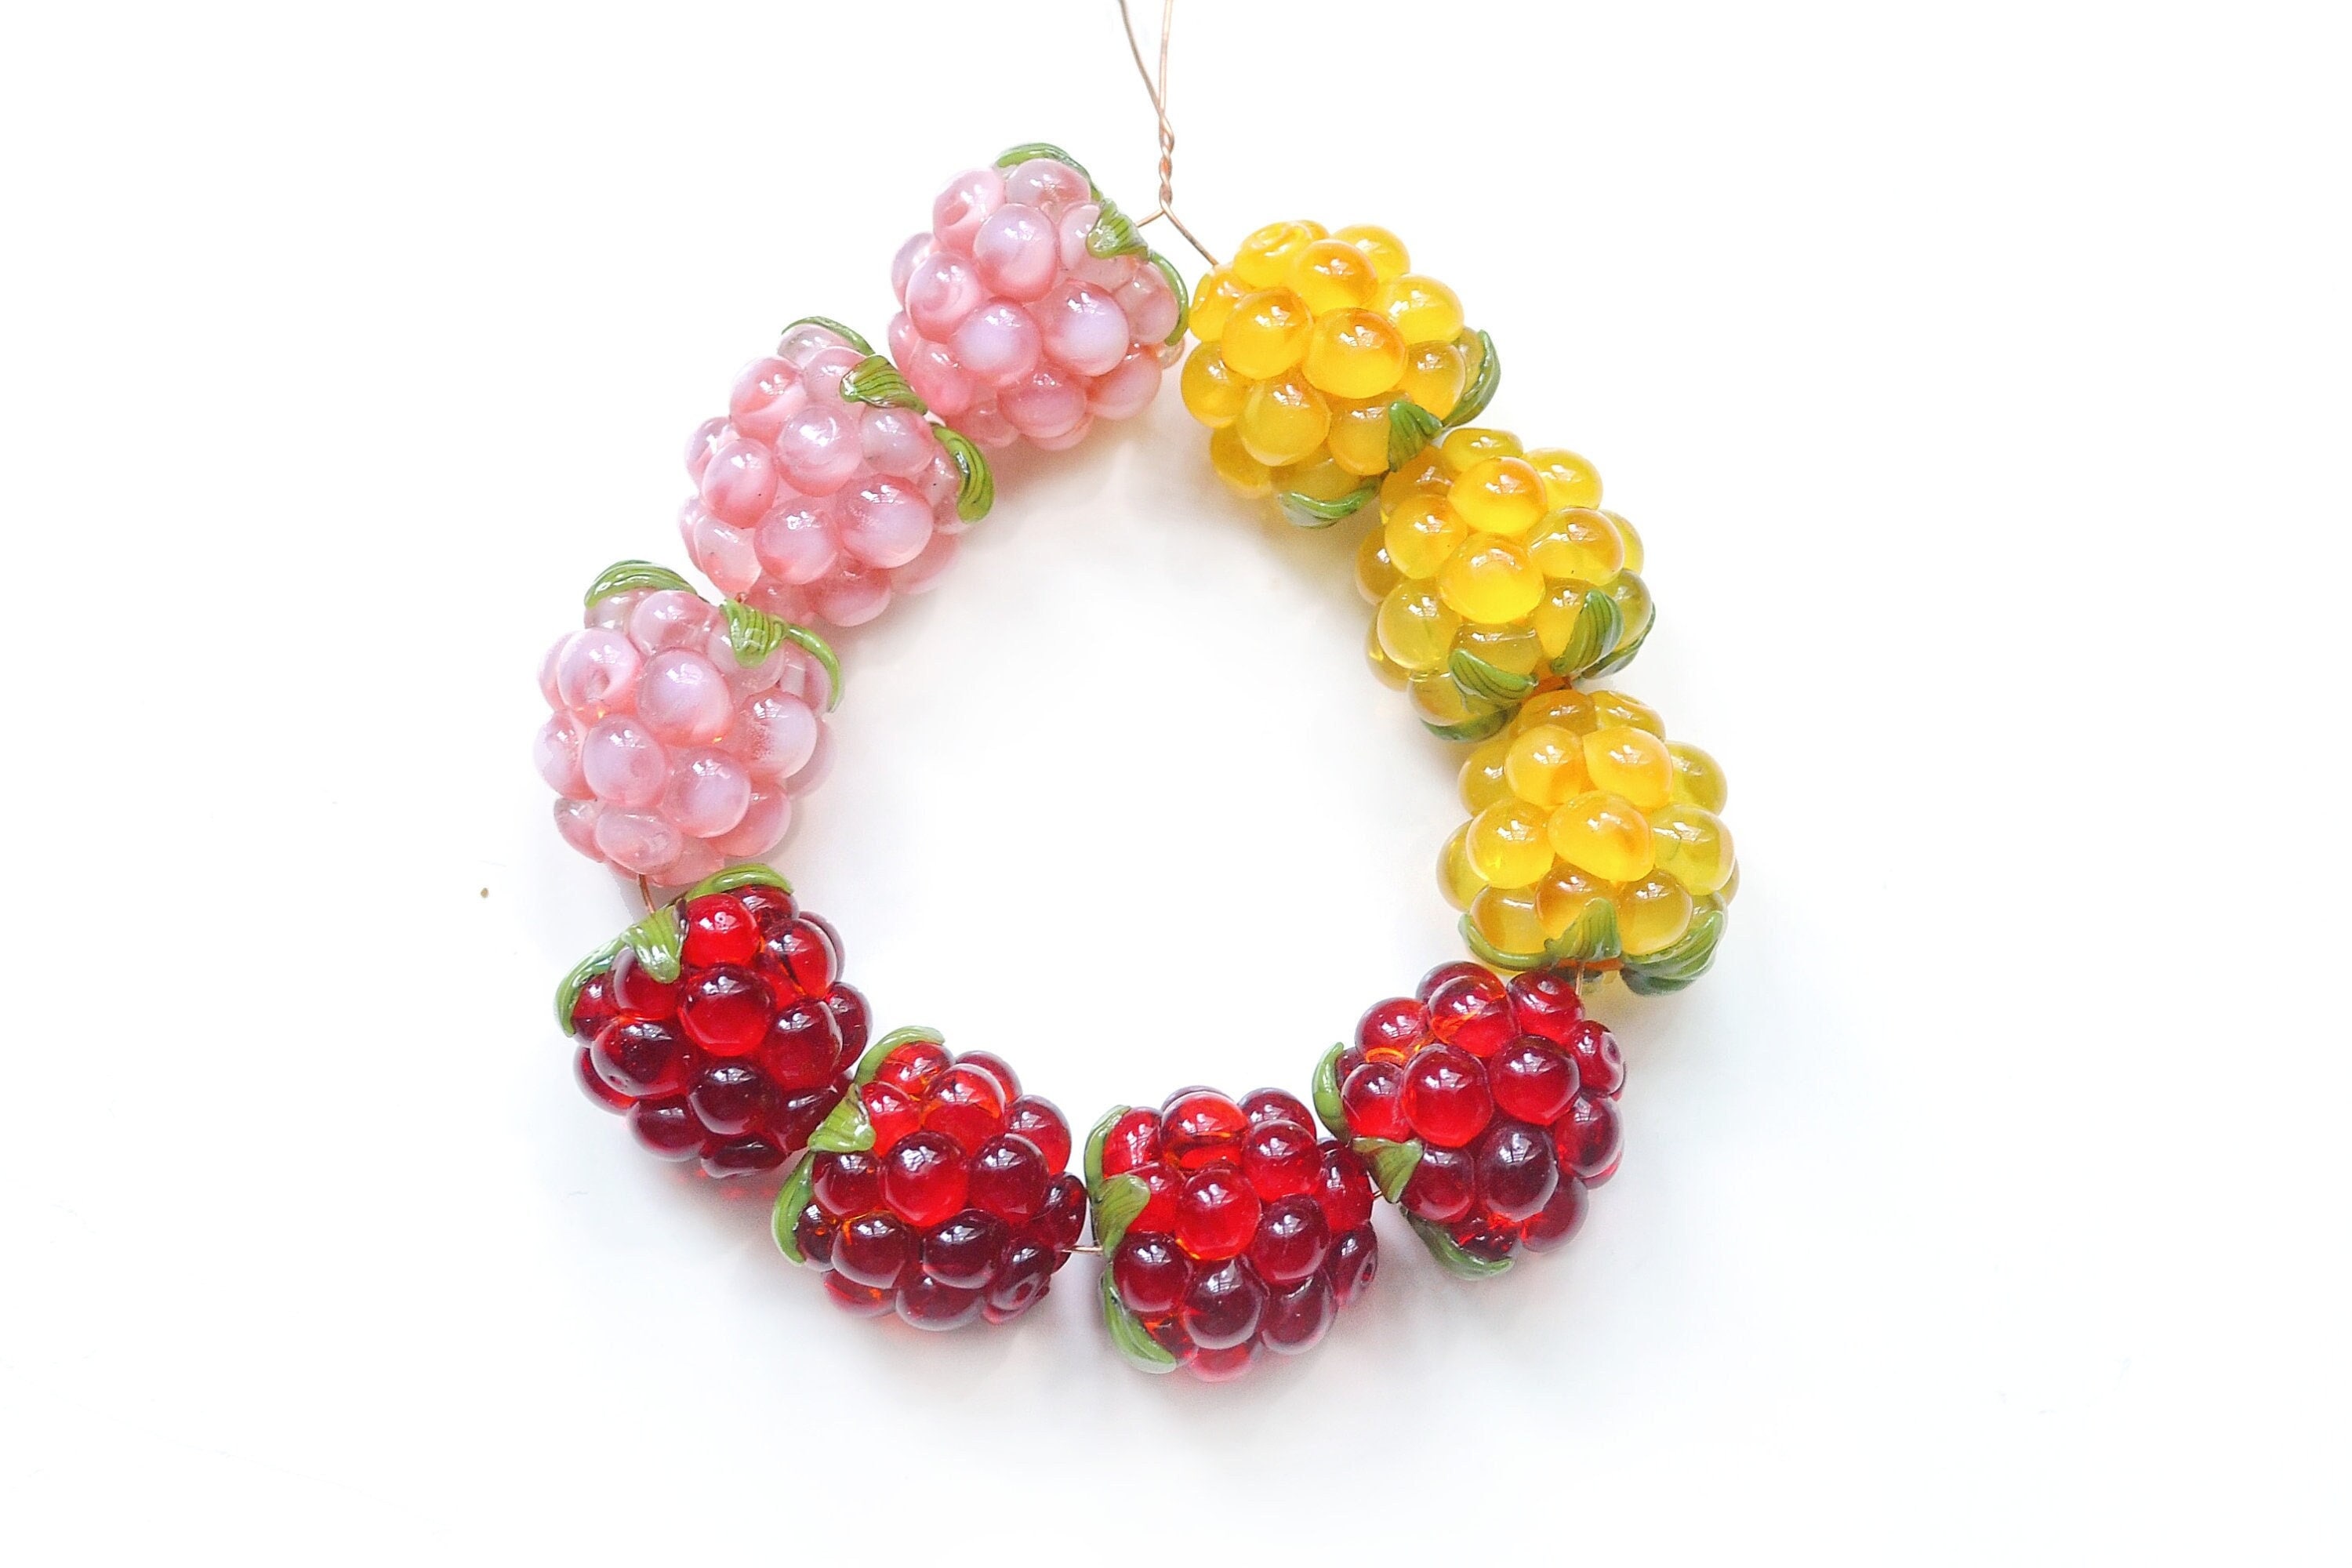 10mm Berry Bubblelicious Round Beads for Bracelets, Craft or DIY Projects.